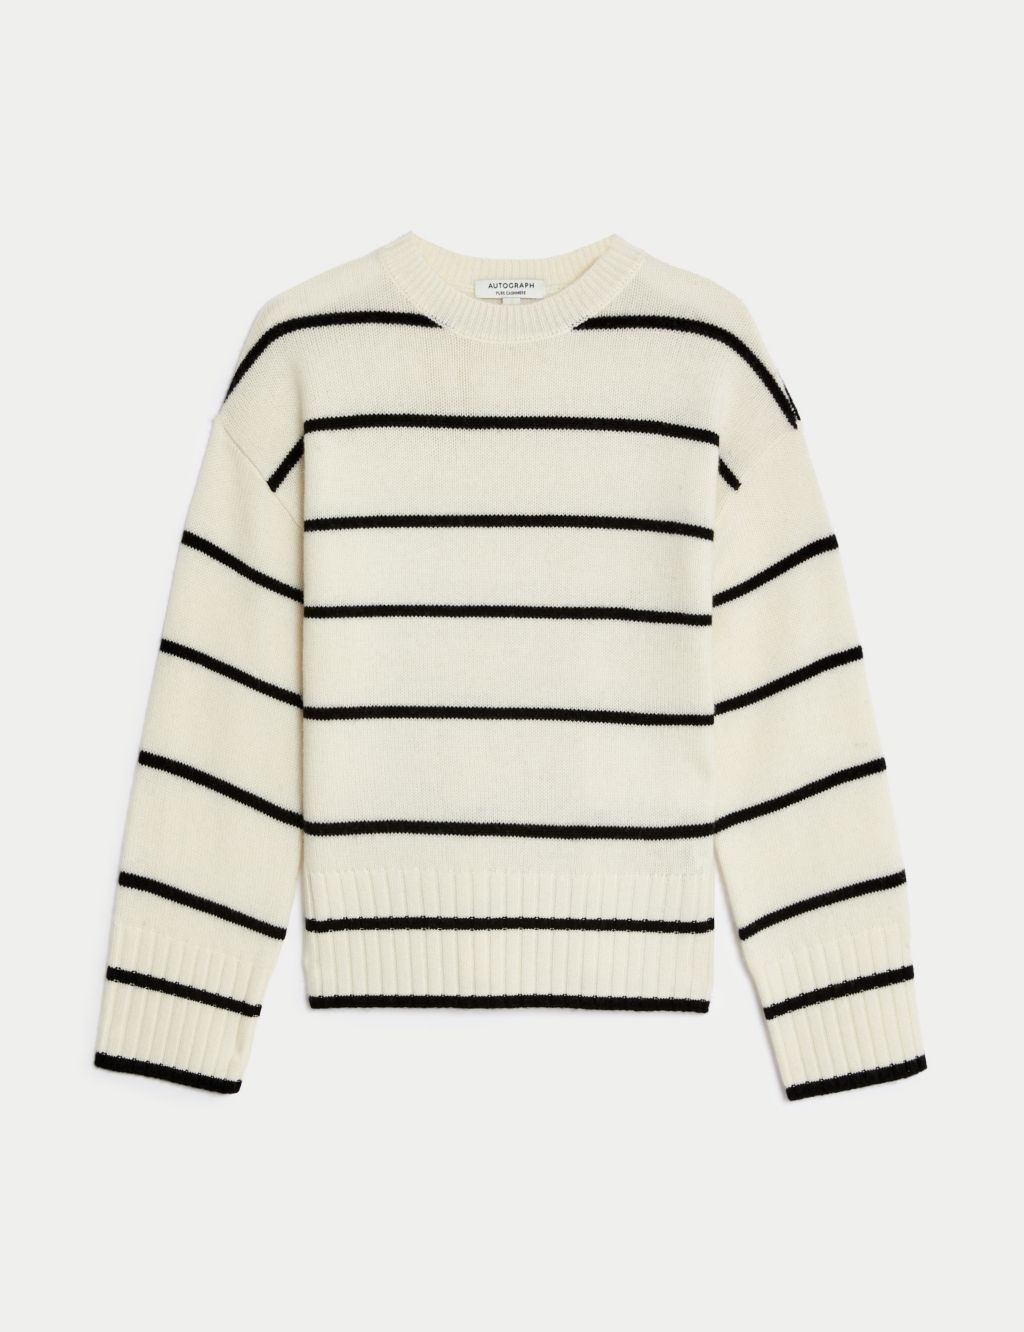 Merino Wool Rich Jumper with Cashmere image 2